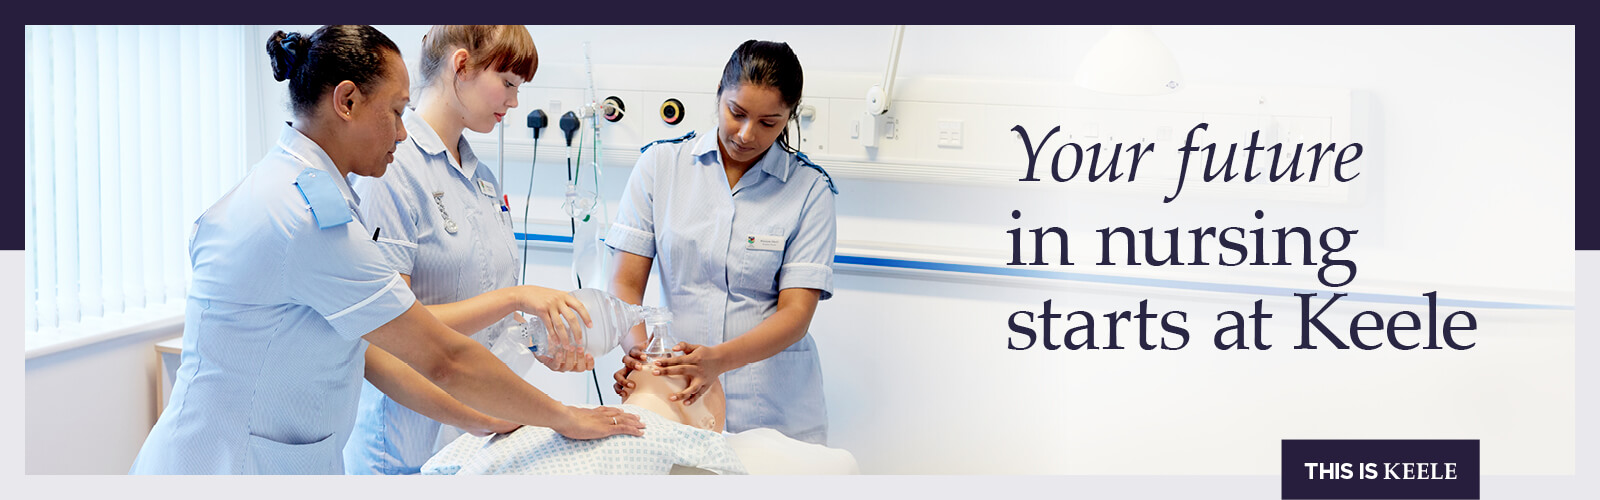 Picture of nursing students working together in class, with text overlay 'Your future in nursing starts at Keele'